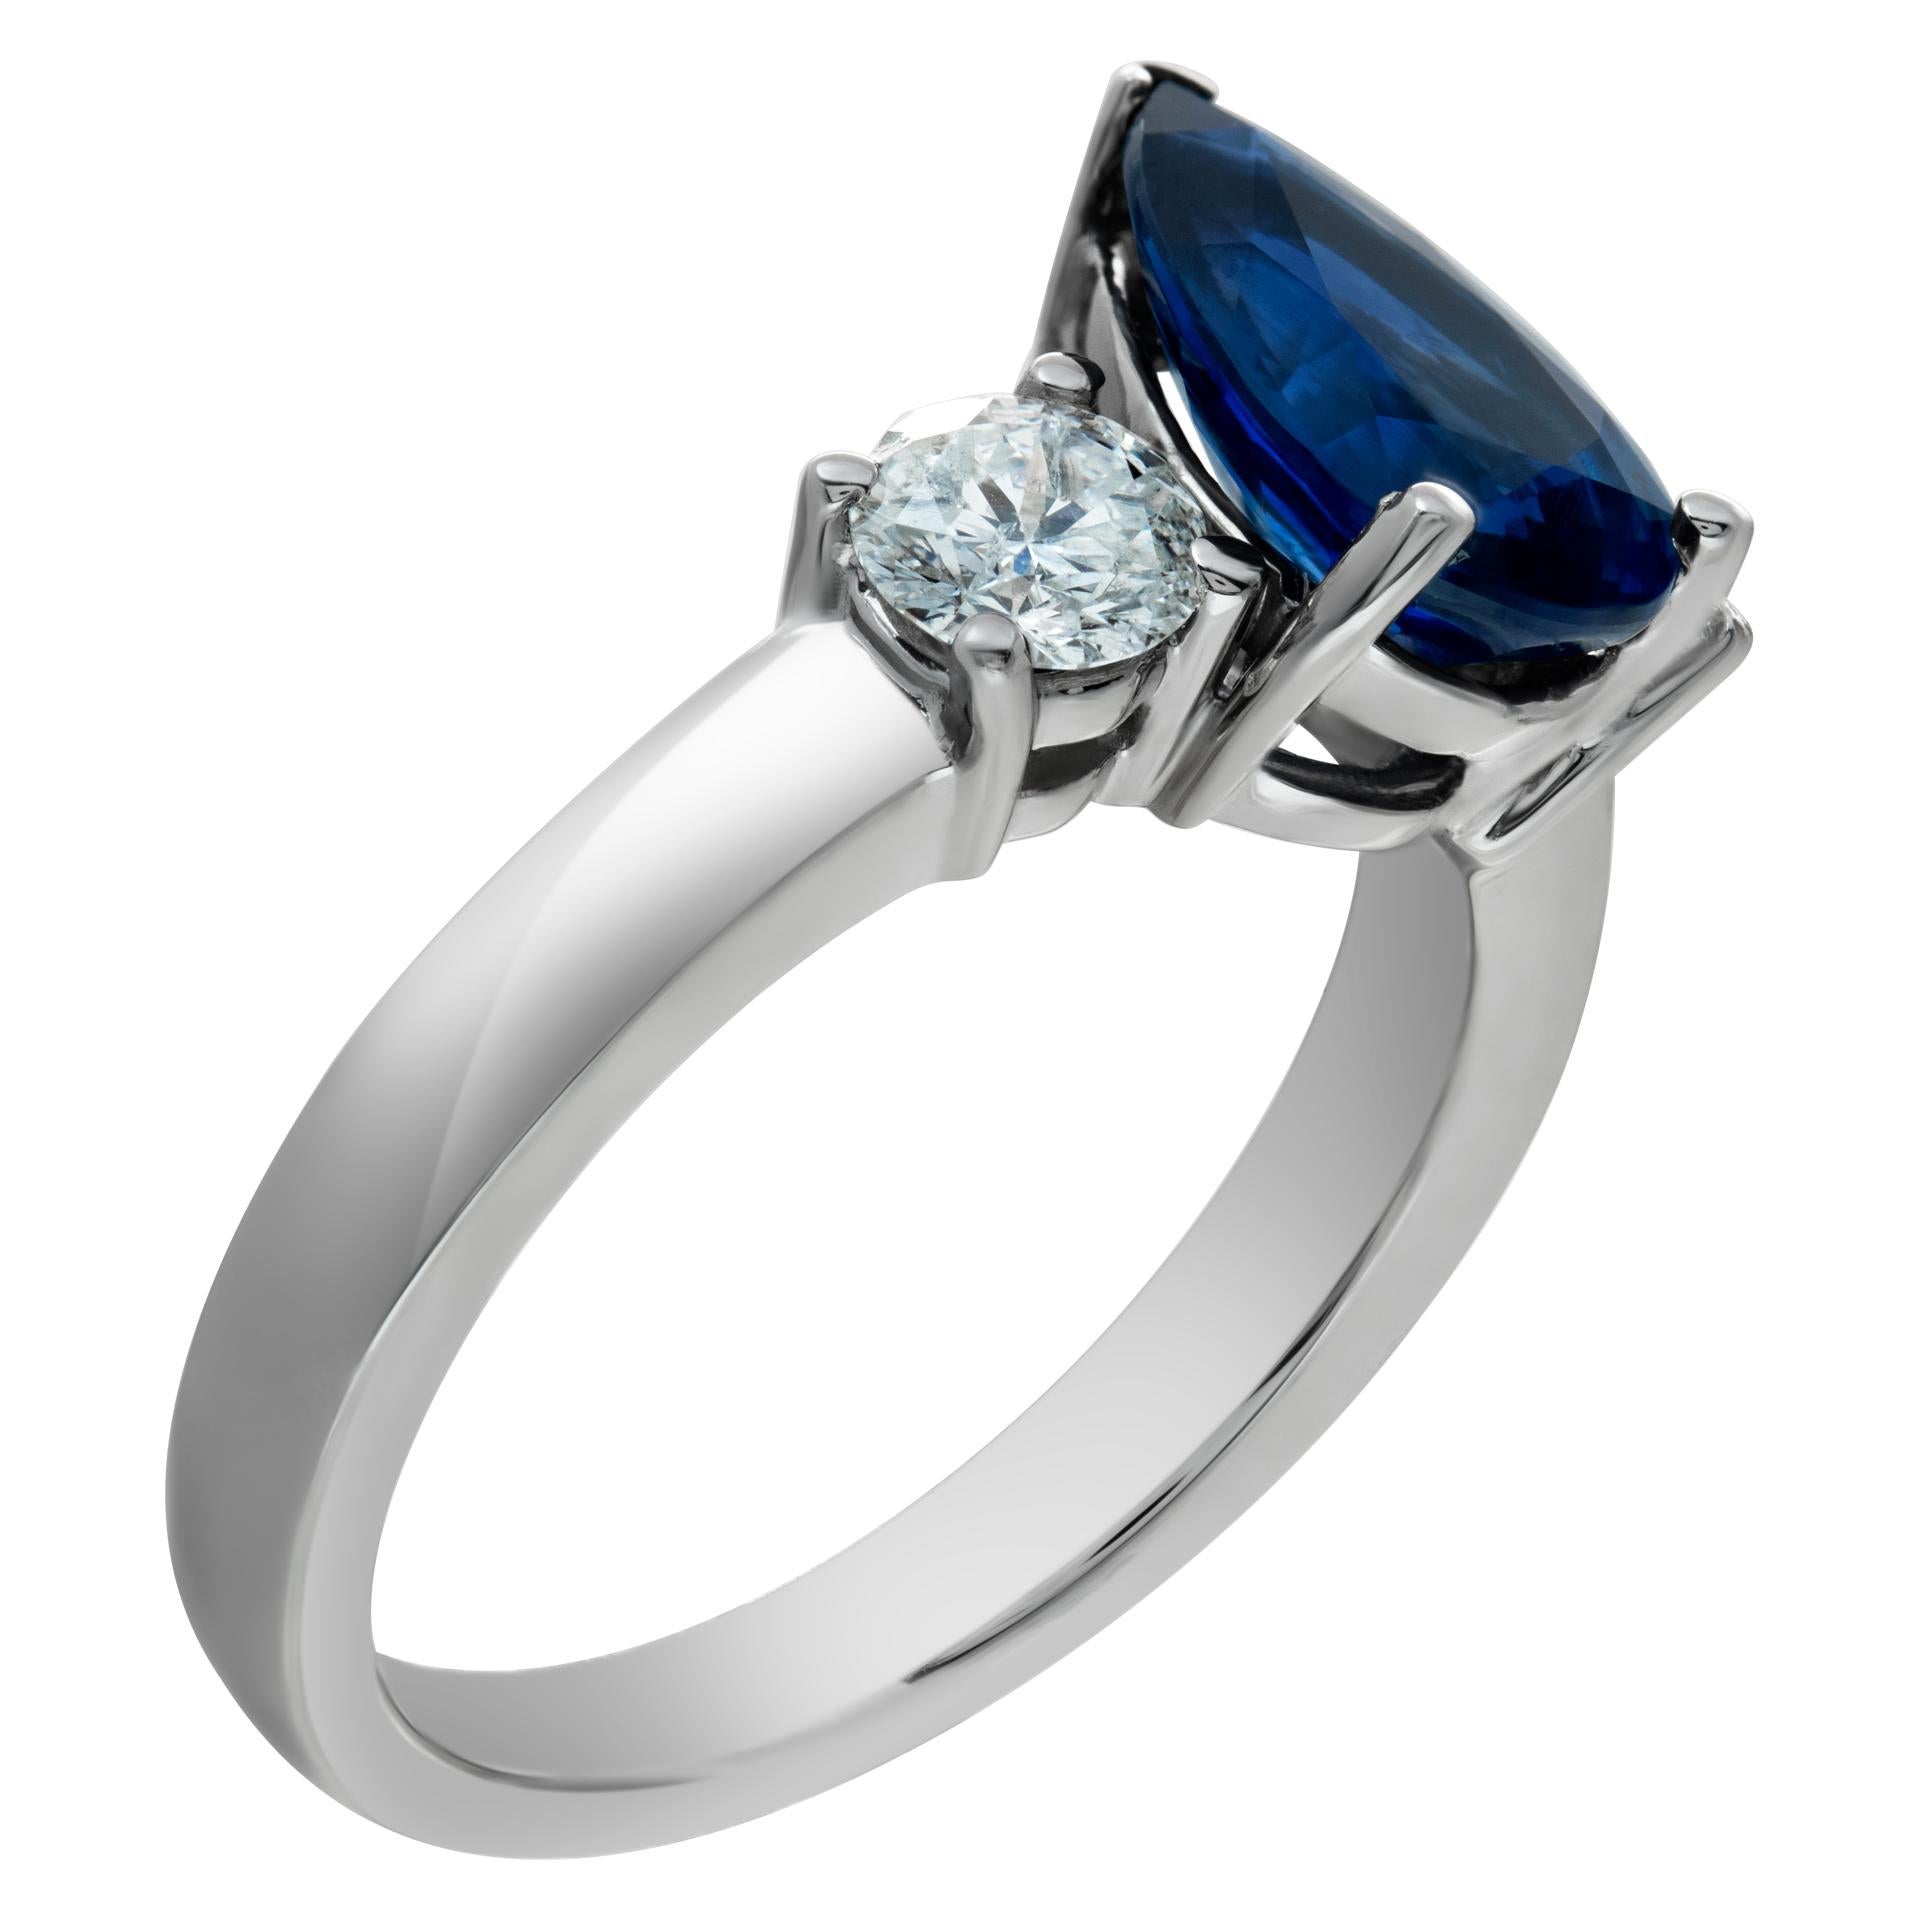 Heated Pear Shape 2.16 Carat Sapphire Ring In Platinum In Excellent Condition For Sale In Surfside, FL